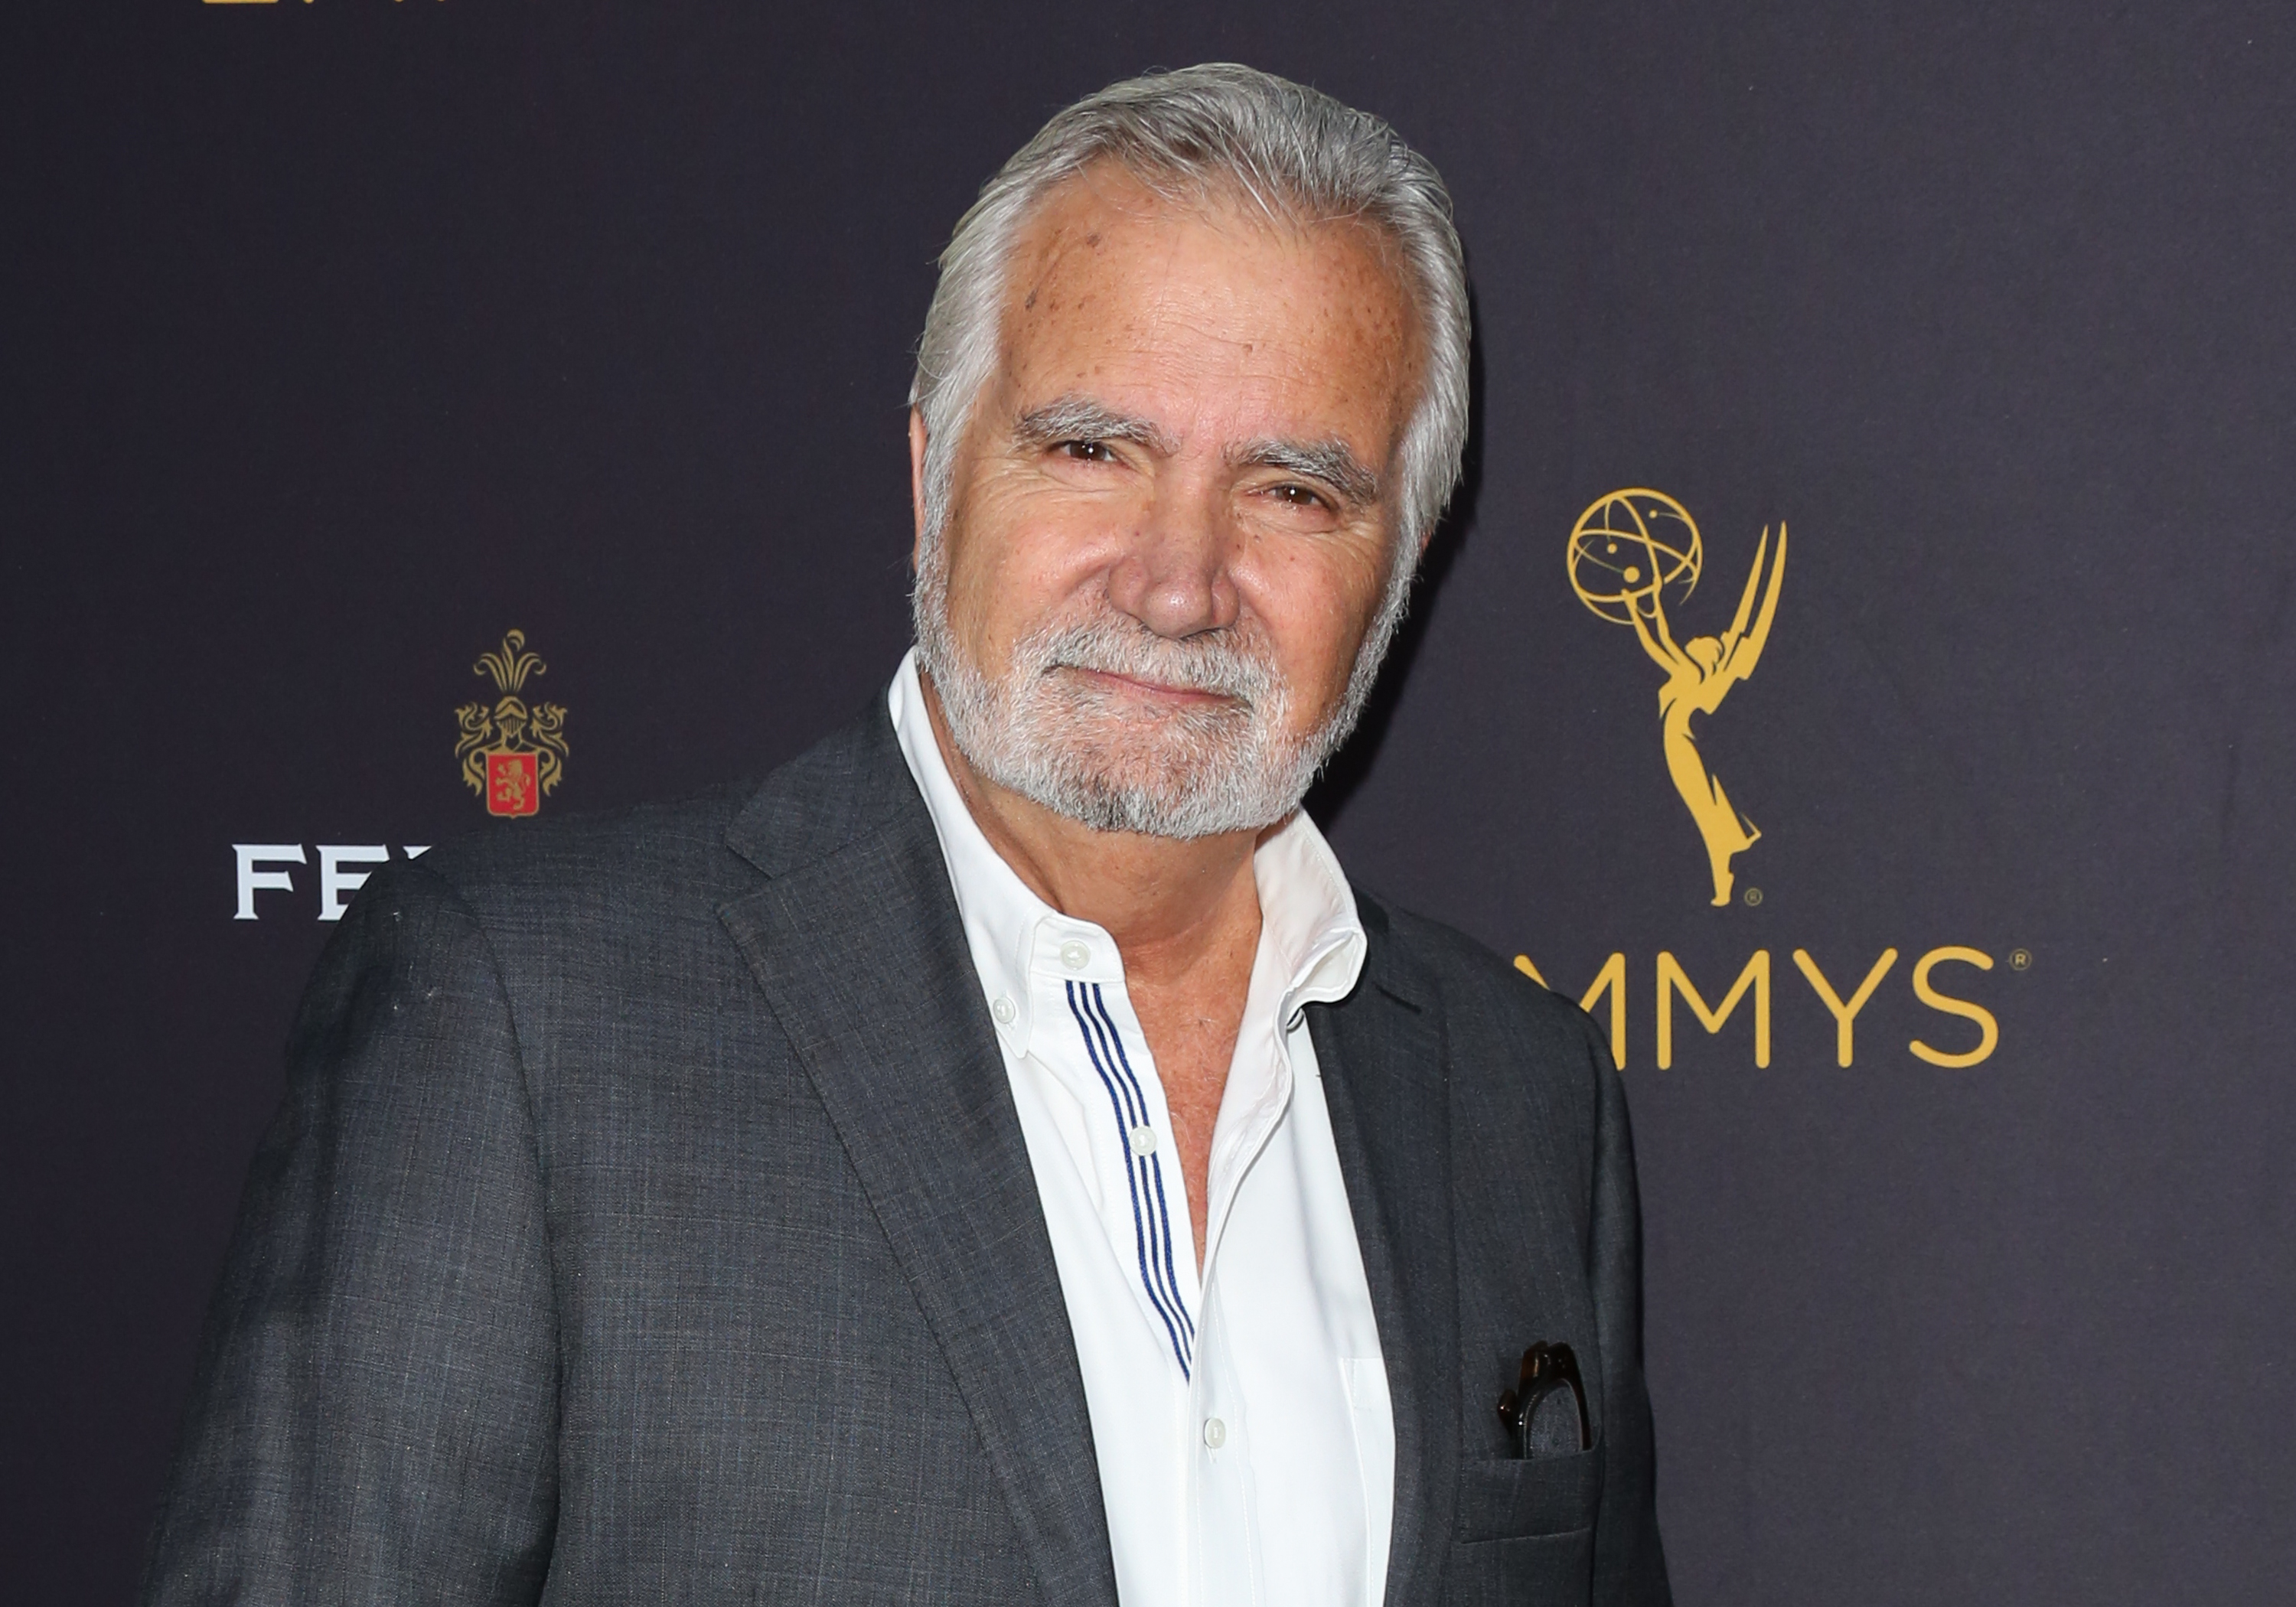 'The Bold and the Beautiful' star John McCook wearing a grey suit and white shirt during the Daytime Emmys.